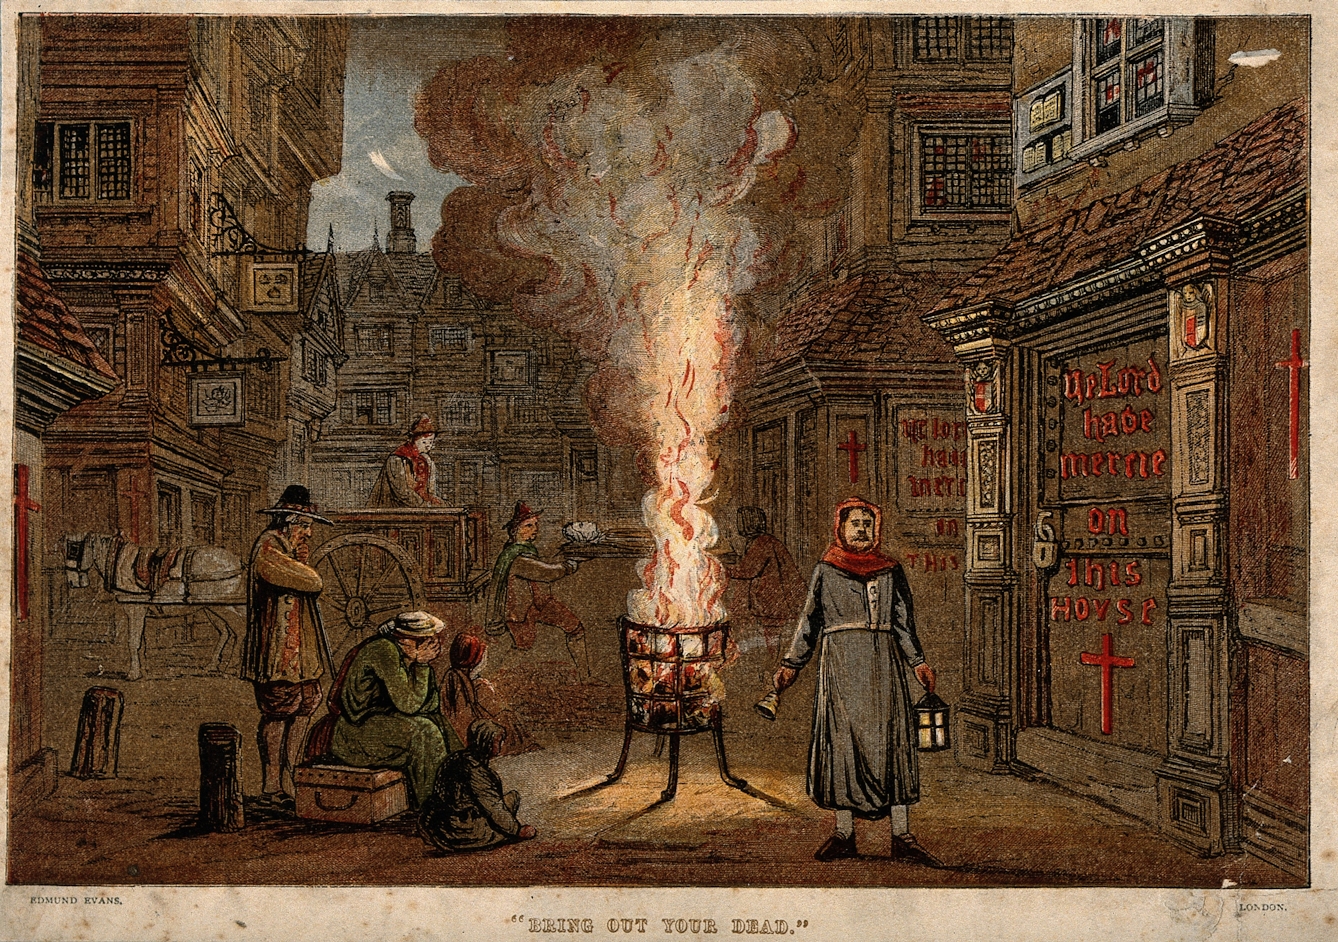 A street during the Great Plague in London, 1665, with a death cart, red cross on a door, fire pit, and mourners.